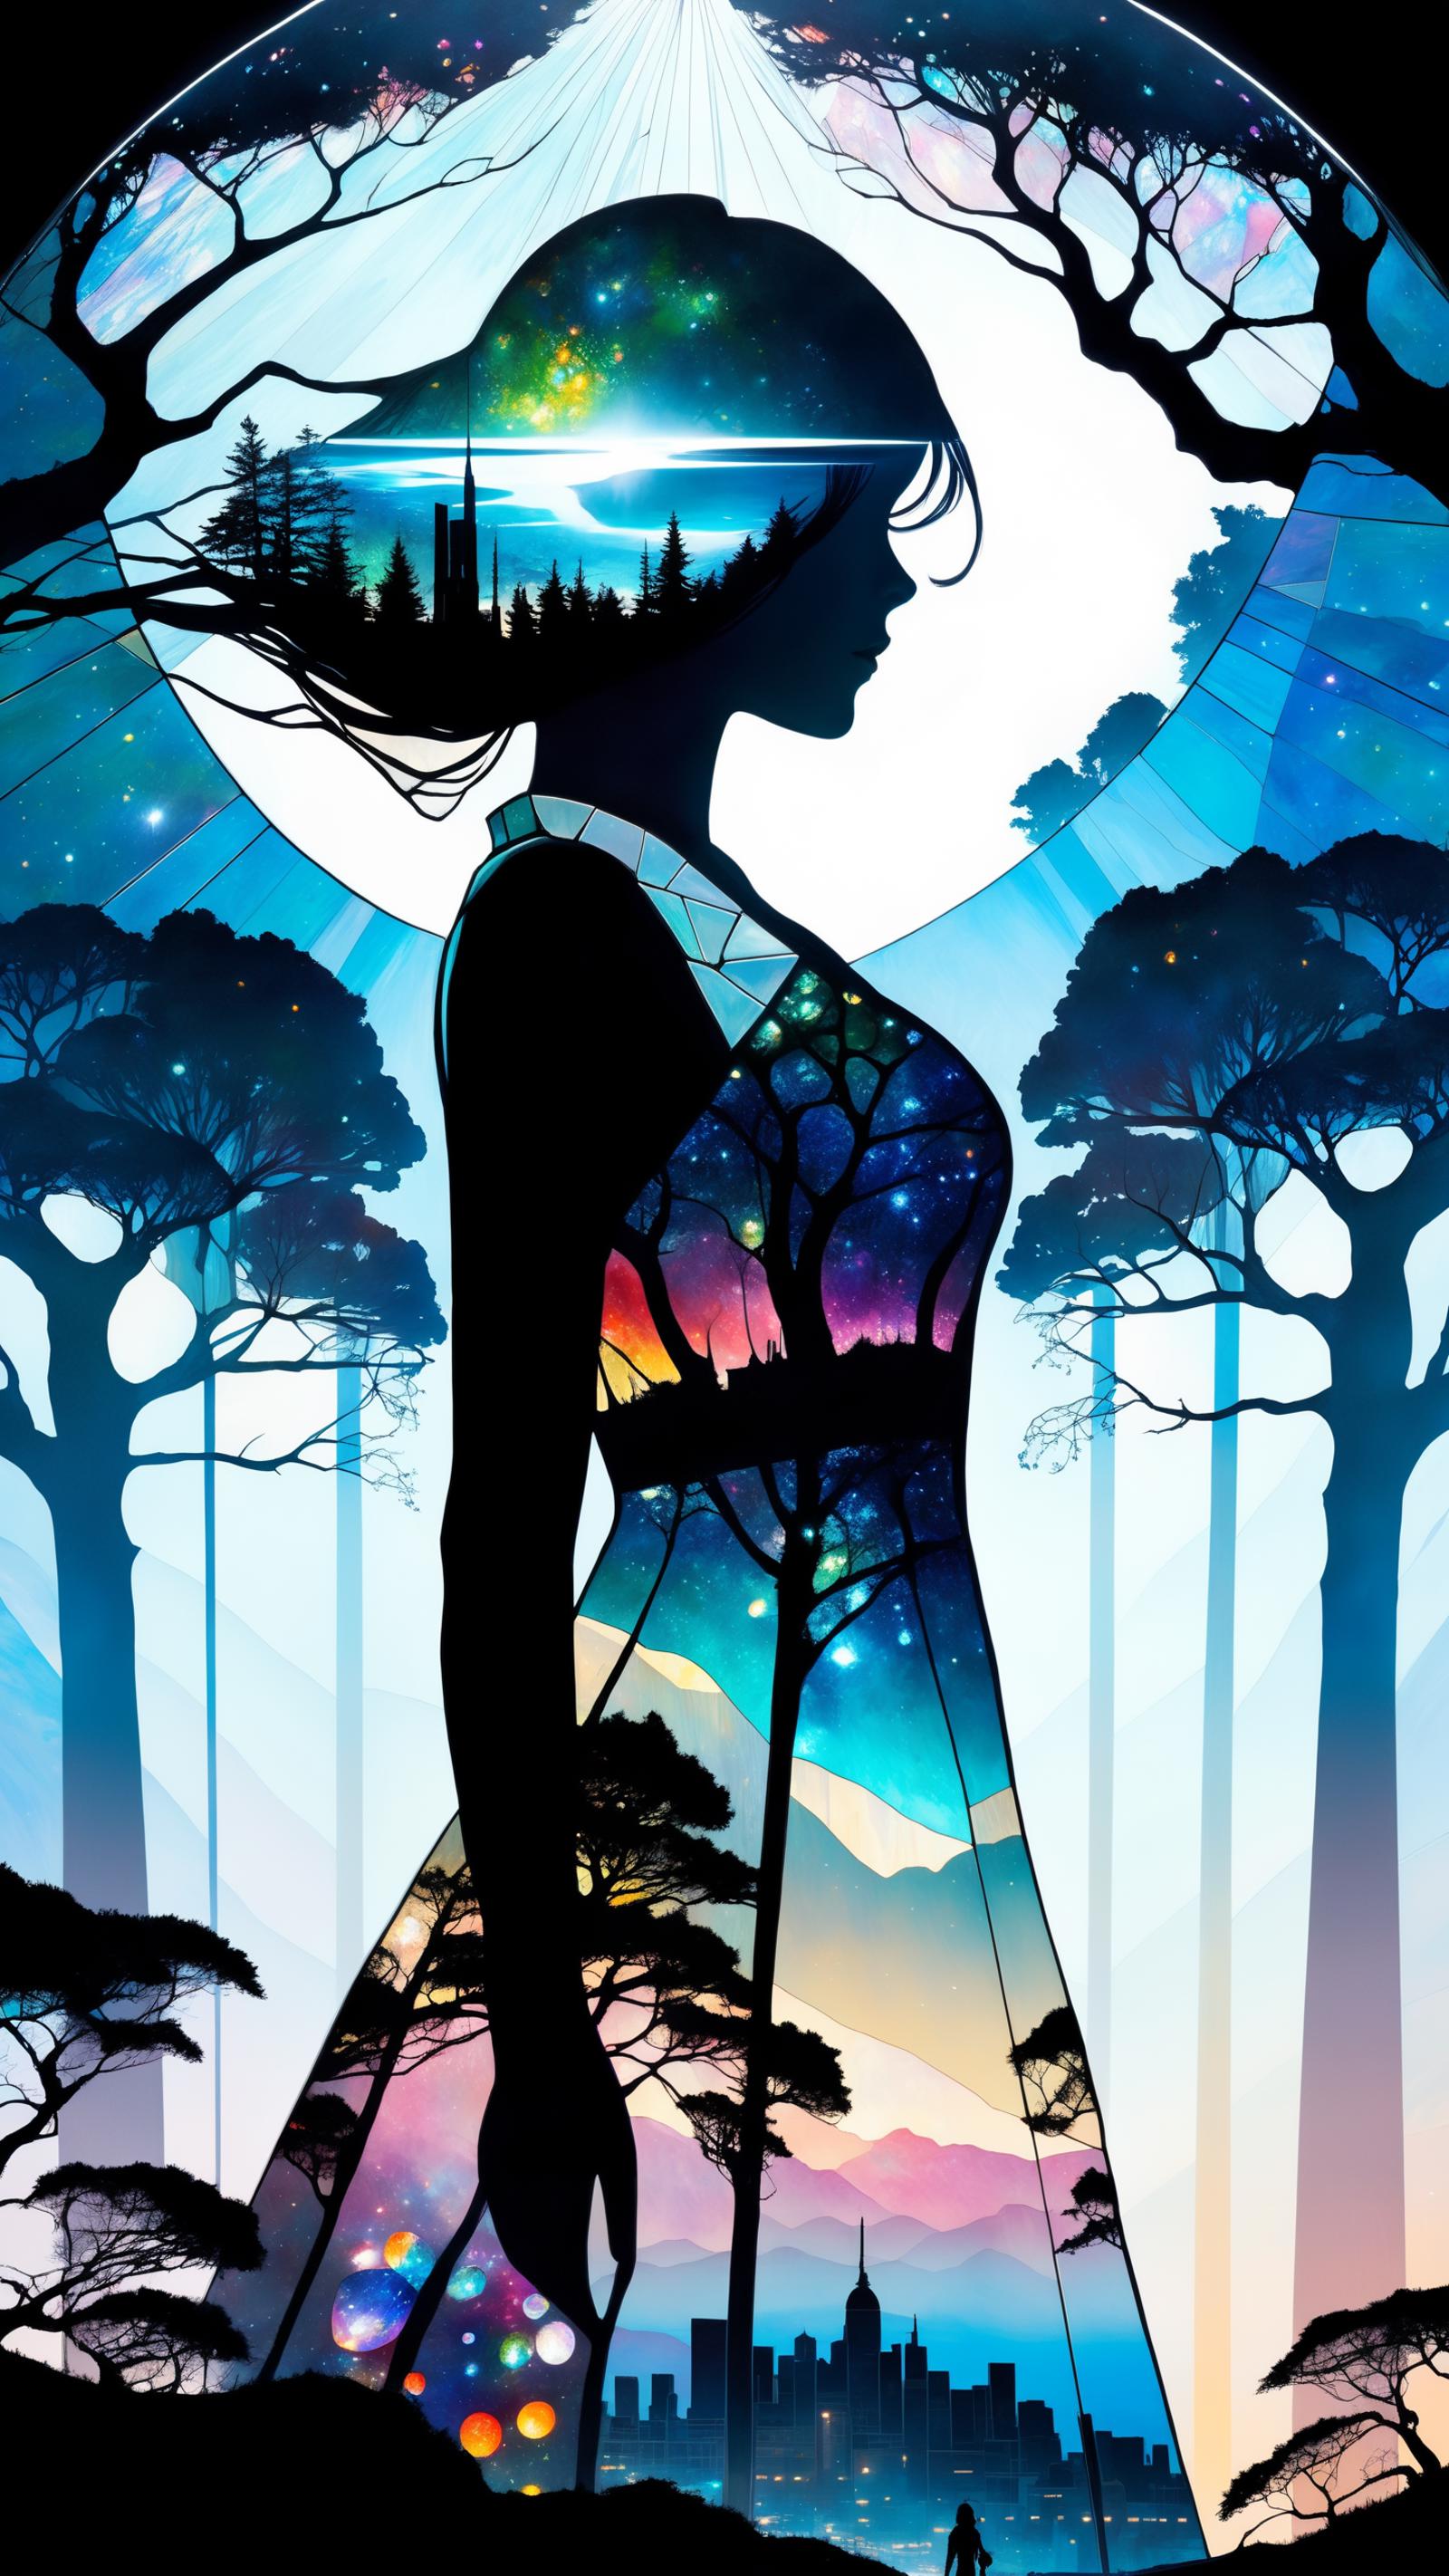 A woman with a dress that has a forest and mountain on it, standing in front of a tree.